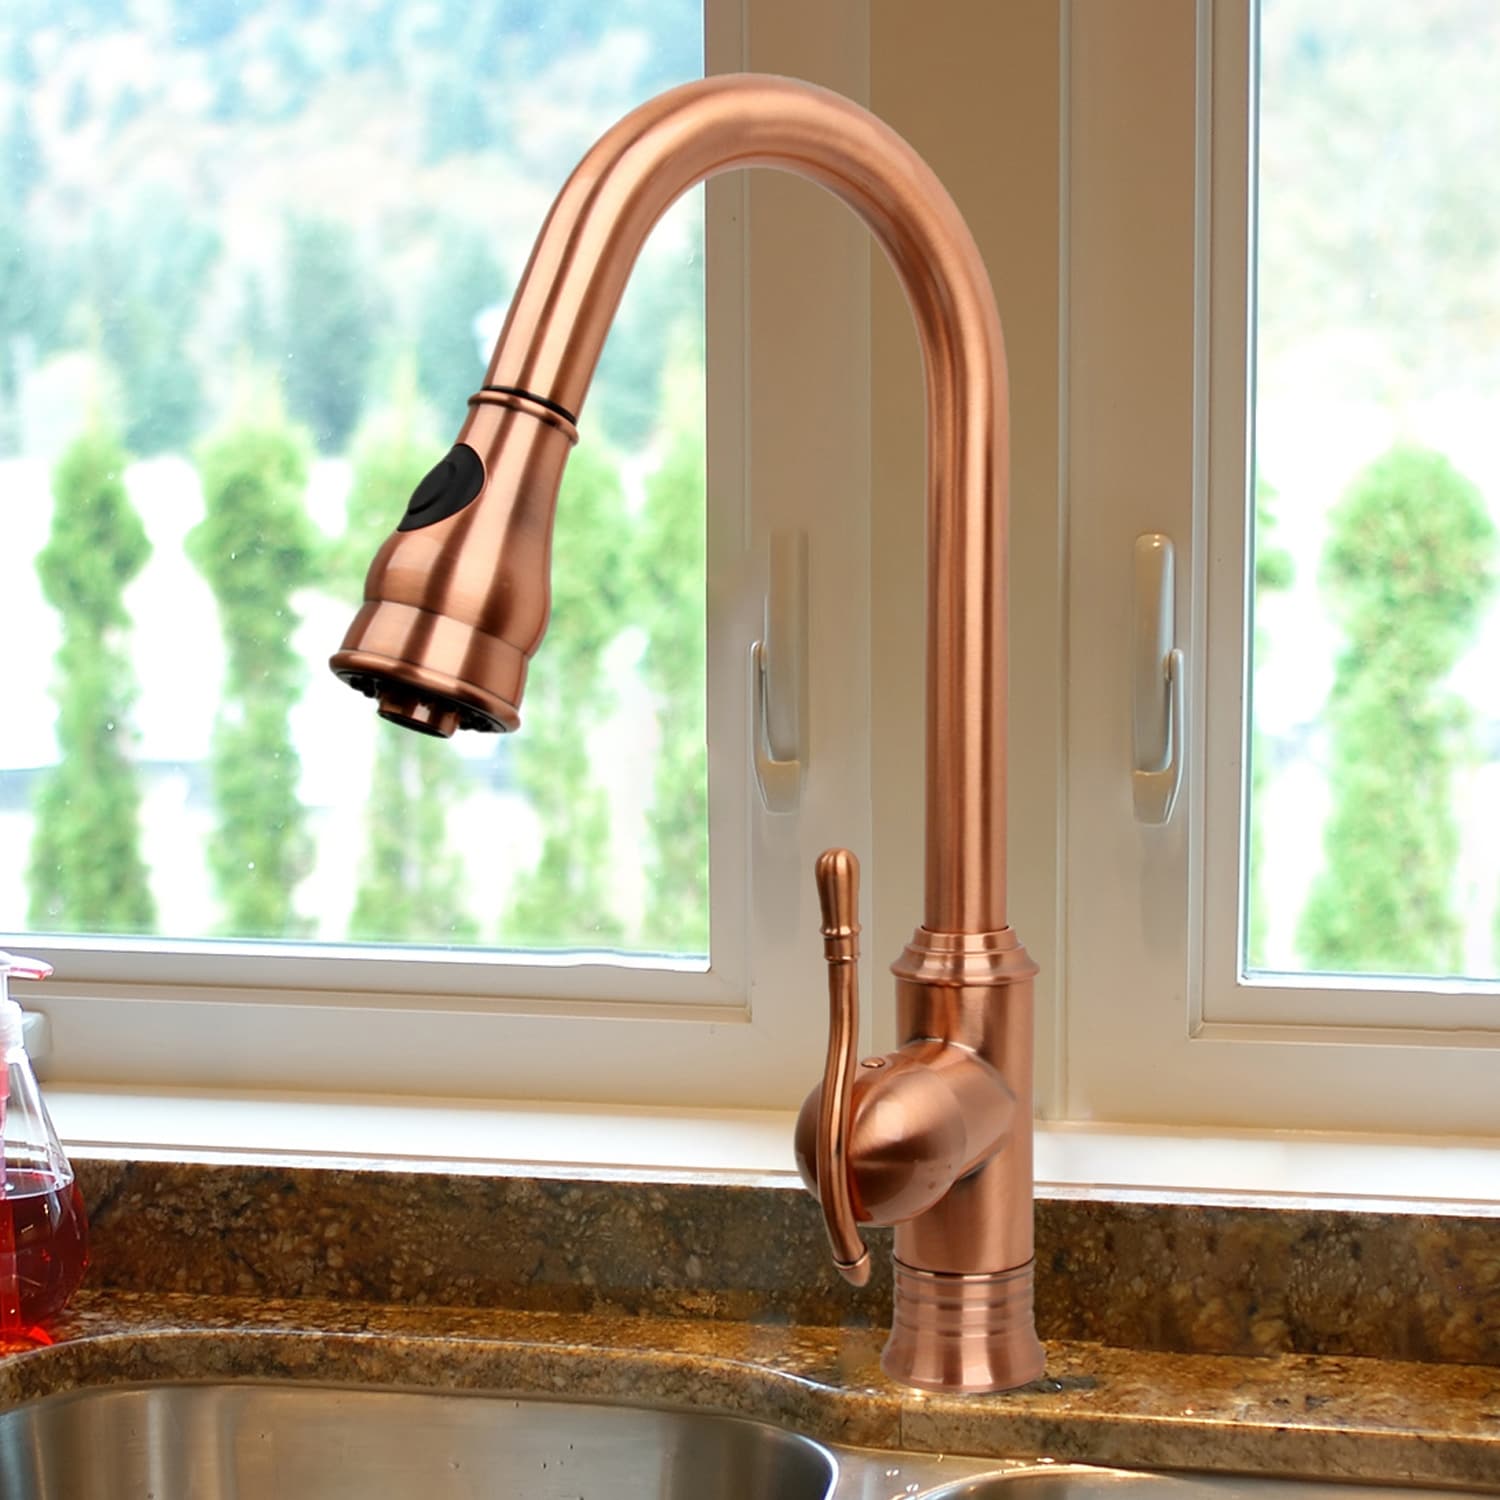 https://ak1.ostkcdn.com/images/products/is/images/direct/2a36c971d746275fd53f5c65fae86df73230a89c/Copper-Kitchen-Faucet-with-Single-Level-handle-and-Pull-Down-Sprayer.jpg